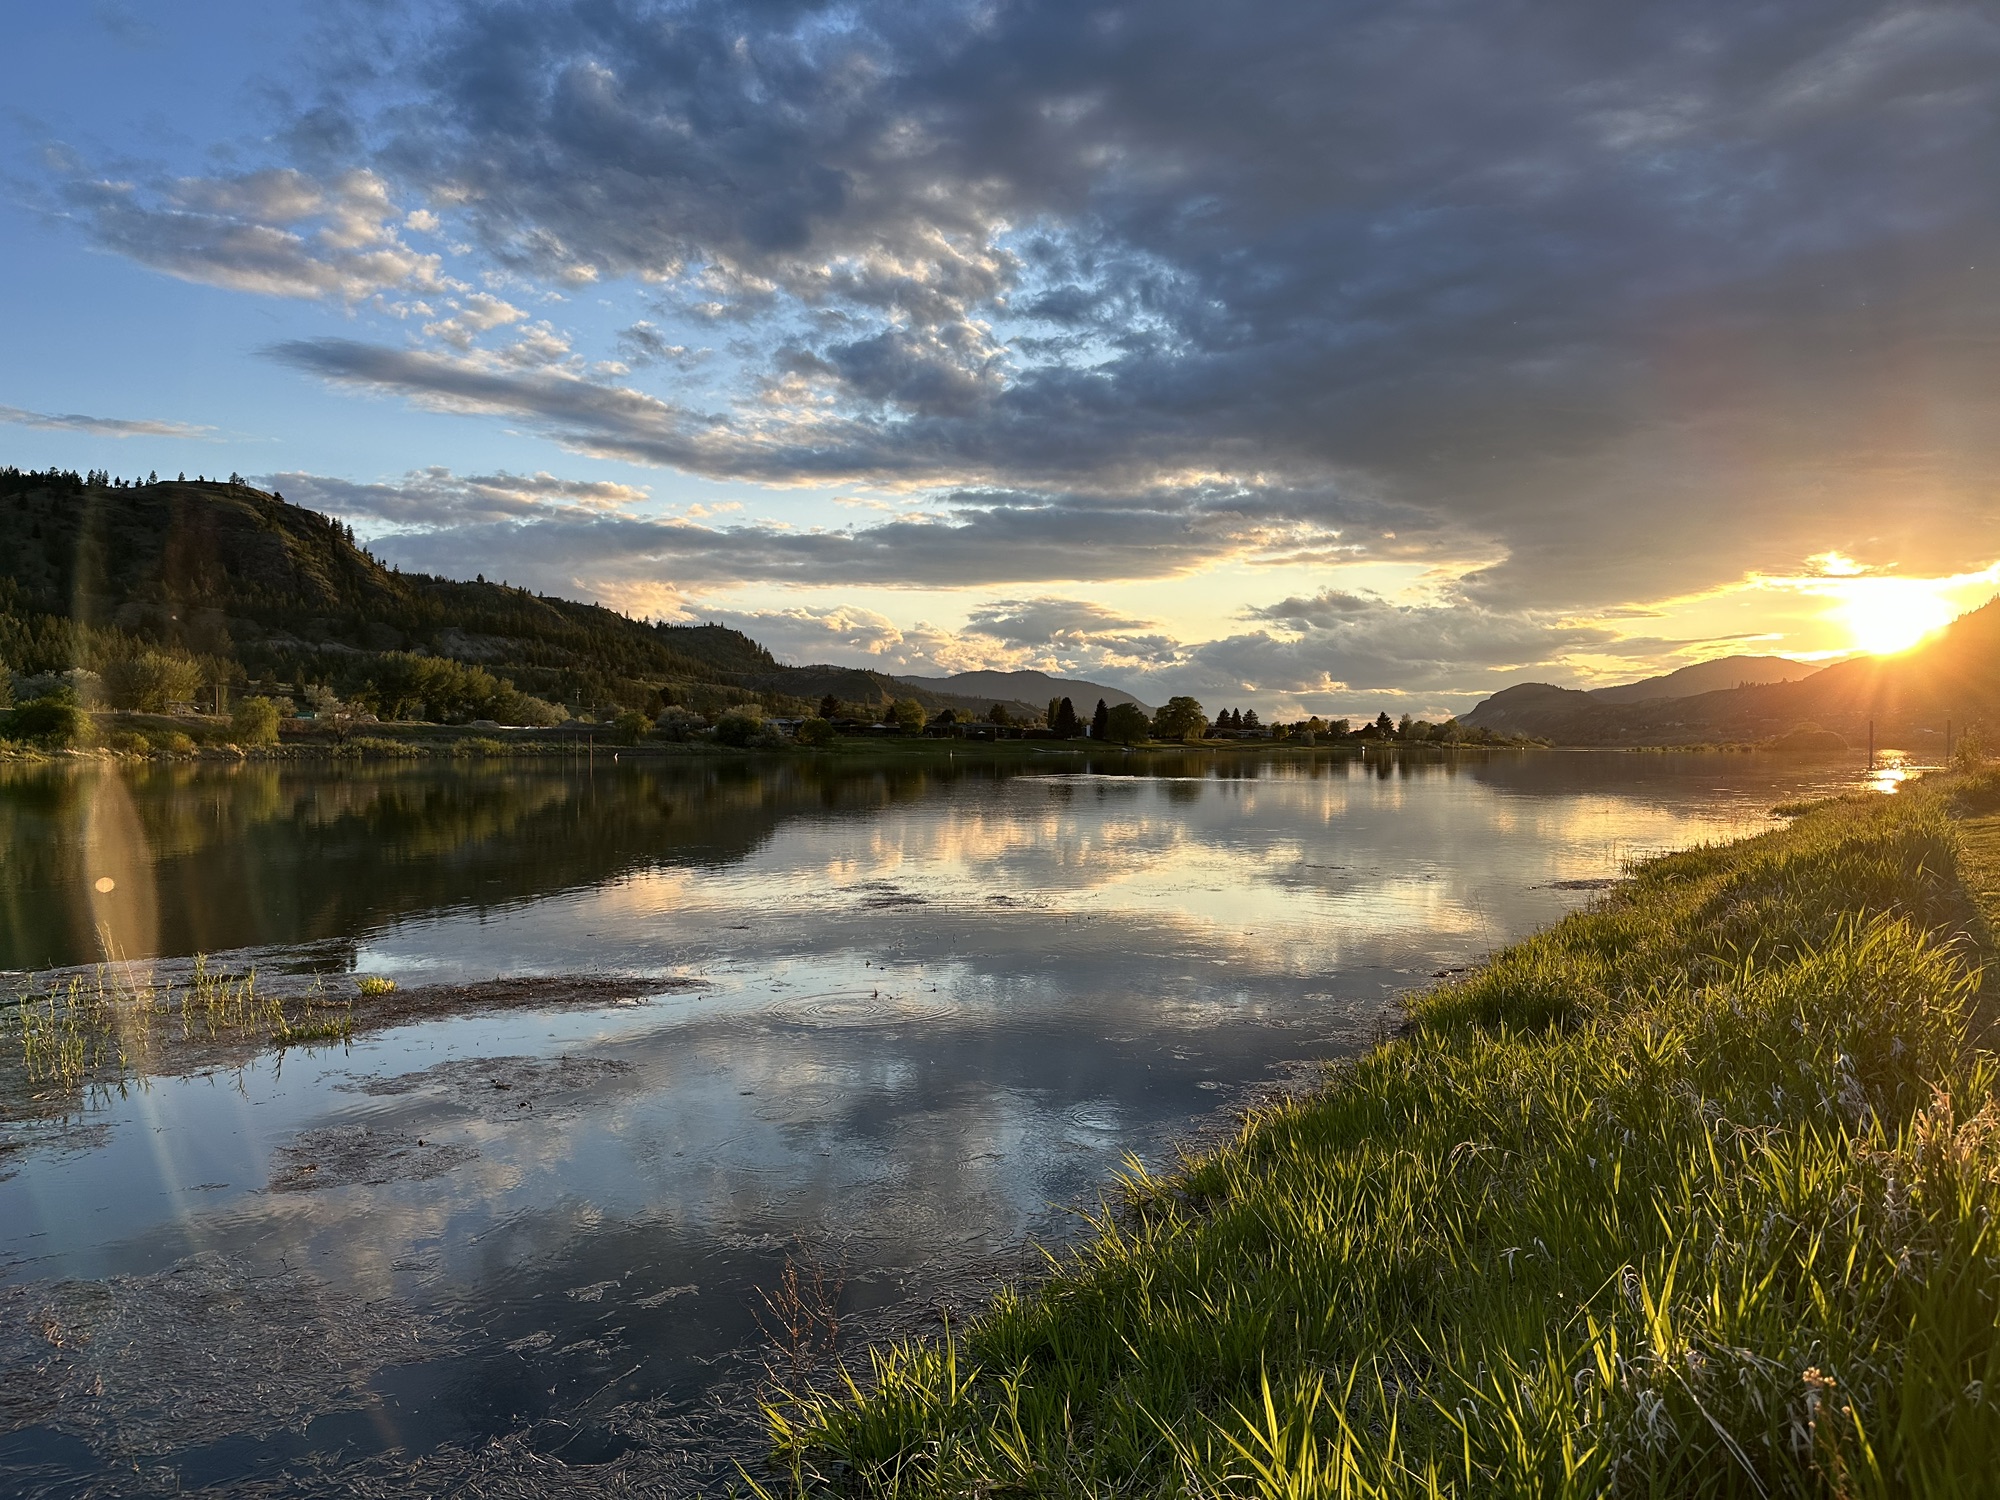 A nice sunset over the South Thompson River near Kamloops, BC (Canada). 